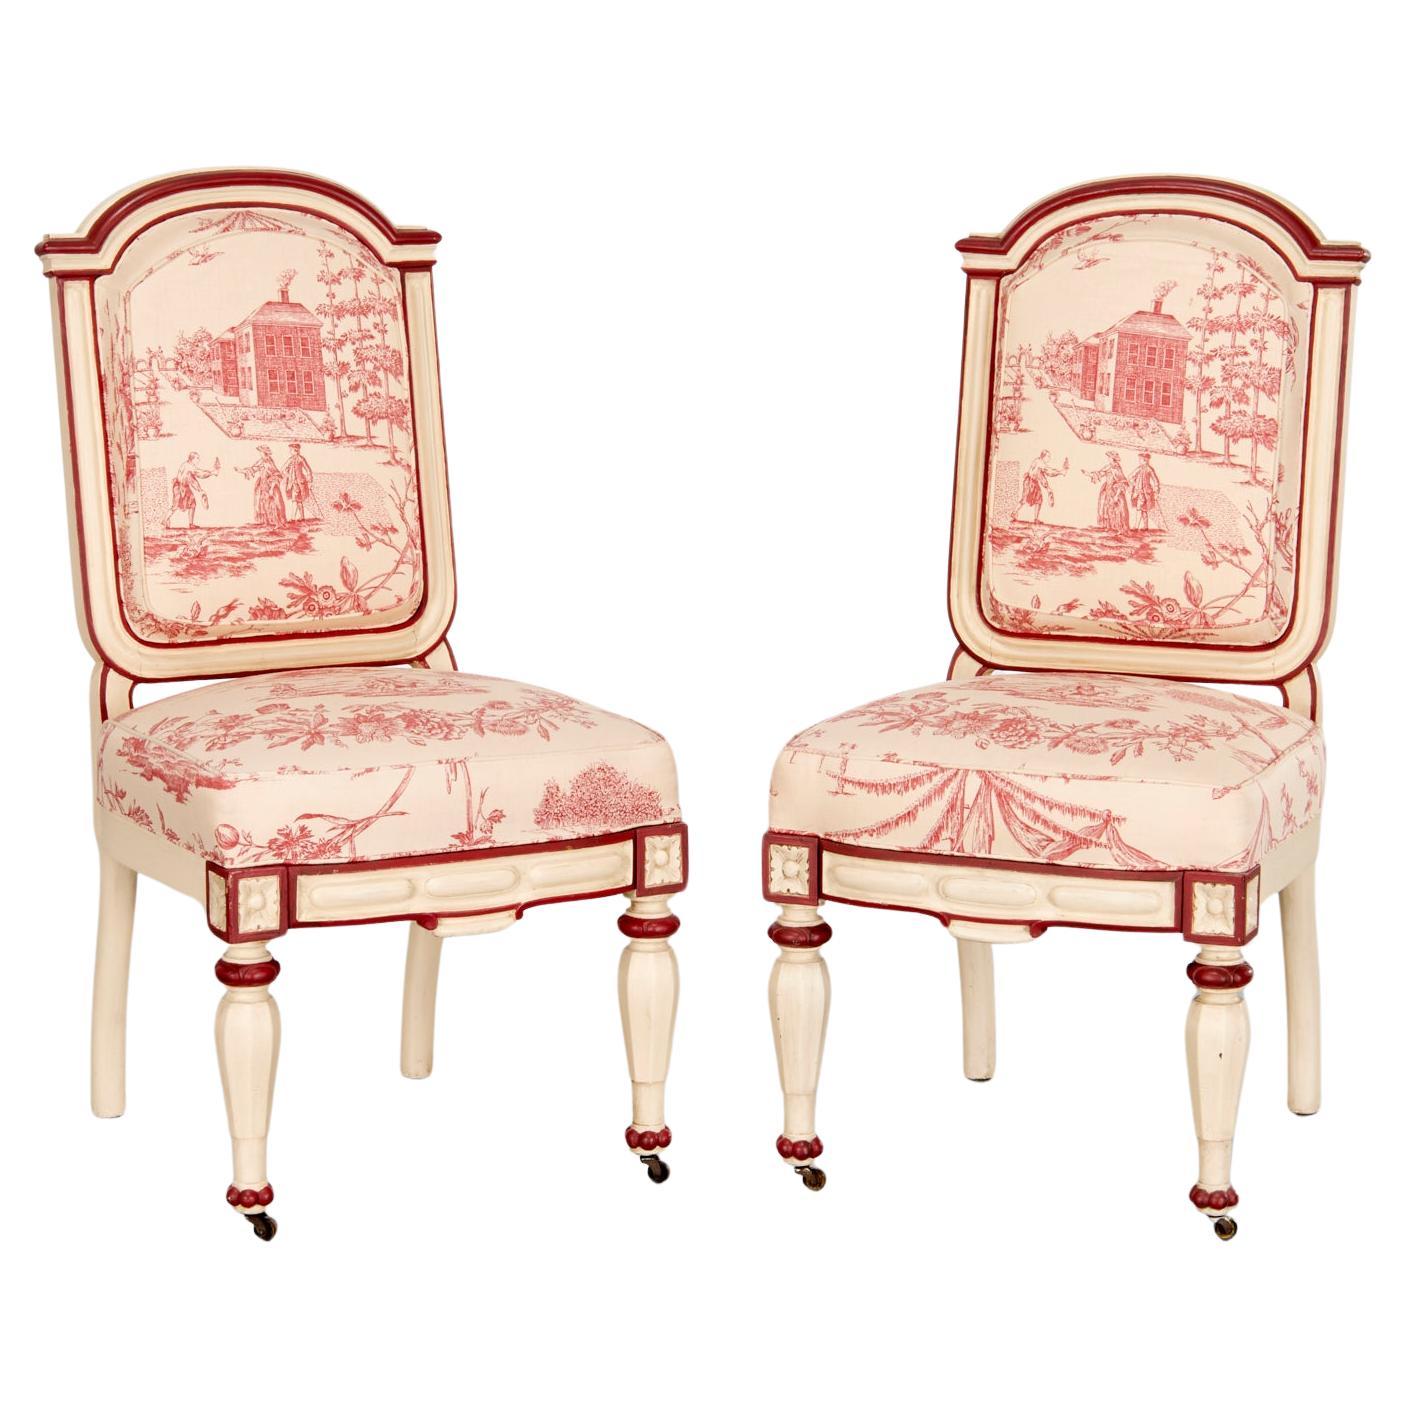 A Pair of Victorian Side Chairs - Cream and Red Painted Frame and Toile Fabric For Sale